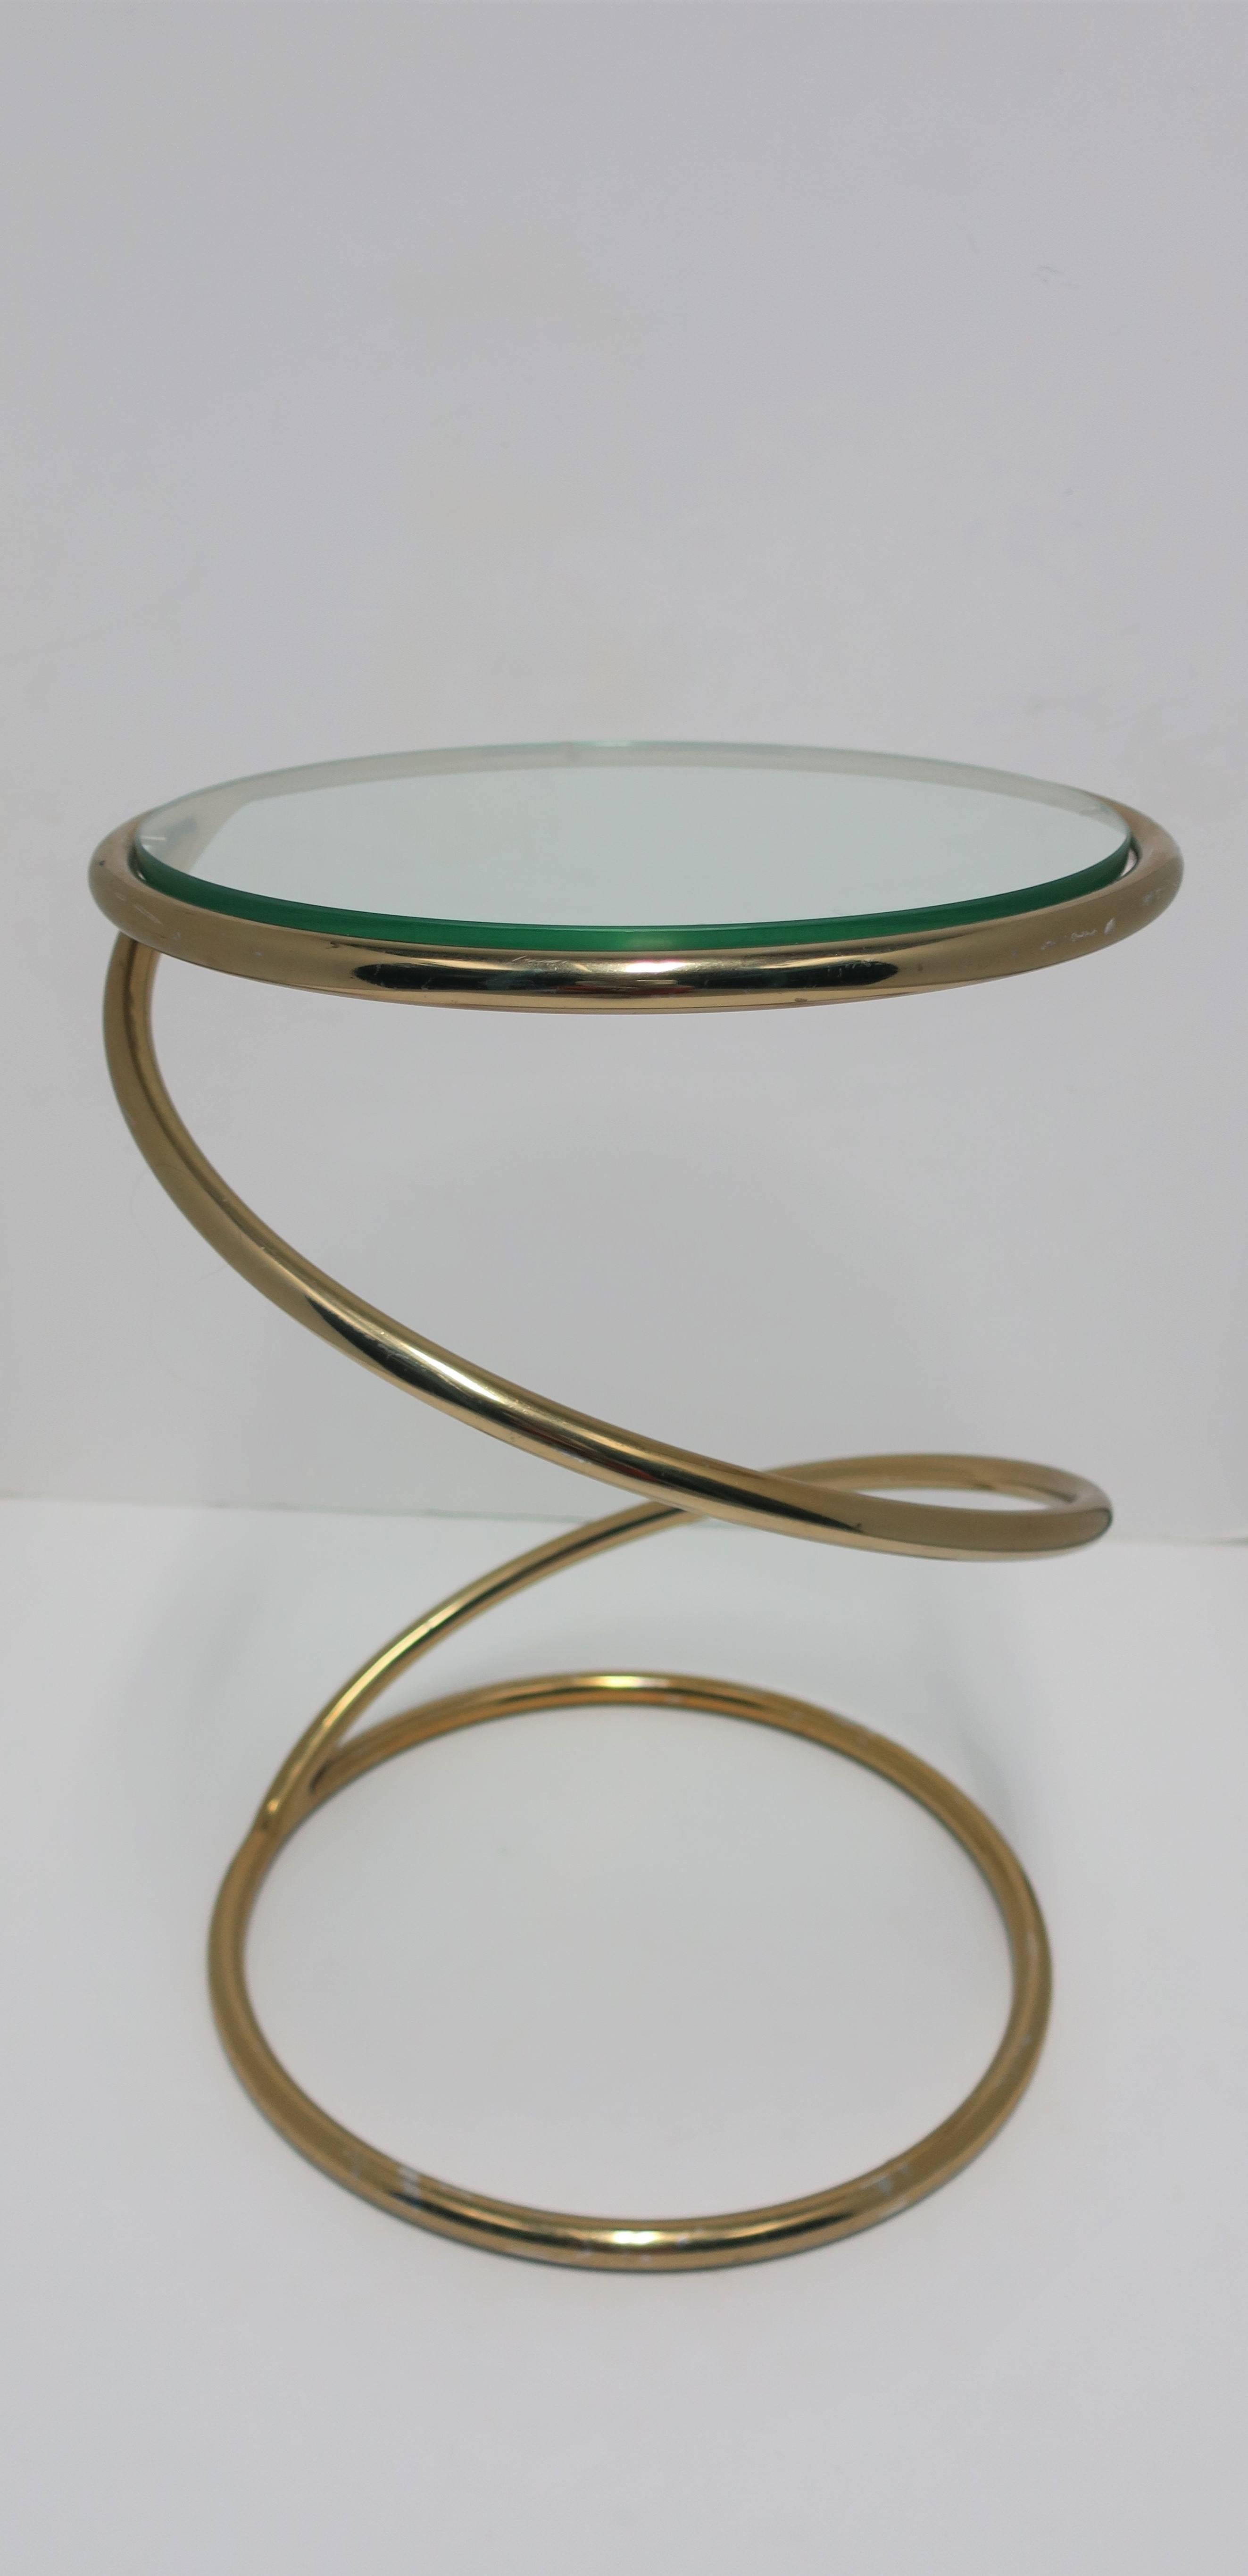 A vintage Modern round brass-plated and glass 'twist' side table after designer Milo Baughman, circa 1970s. Table has a 'twist' or 'spring' design with substantial glass top. Glass top is new and 'tempered'. 

Measurements include: 18.25 in. H x 13